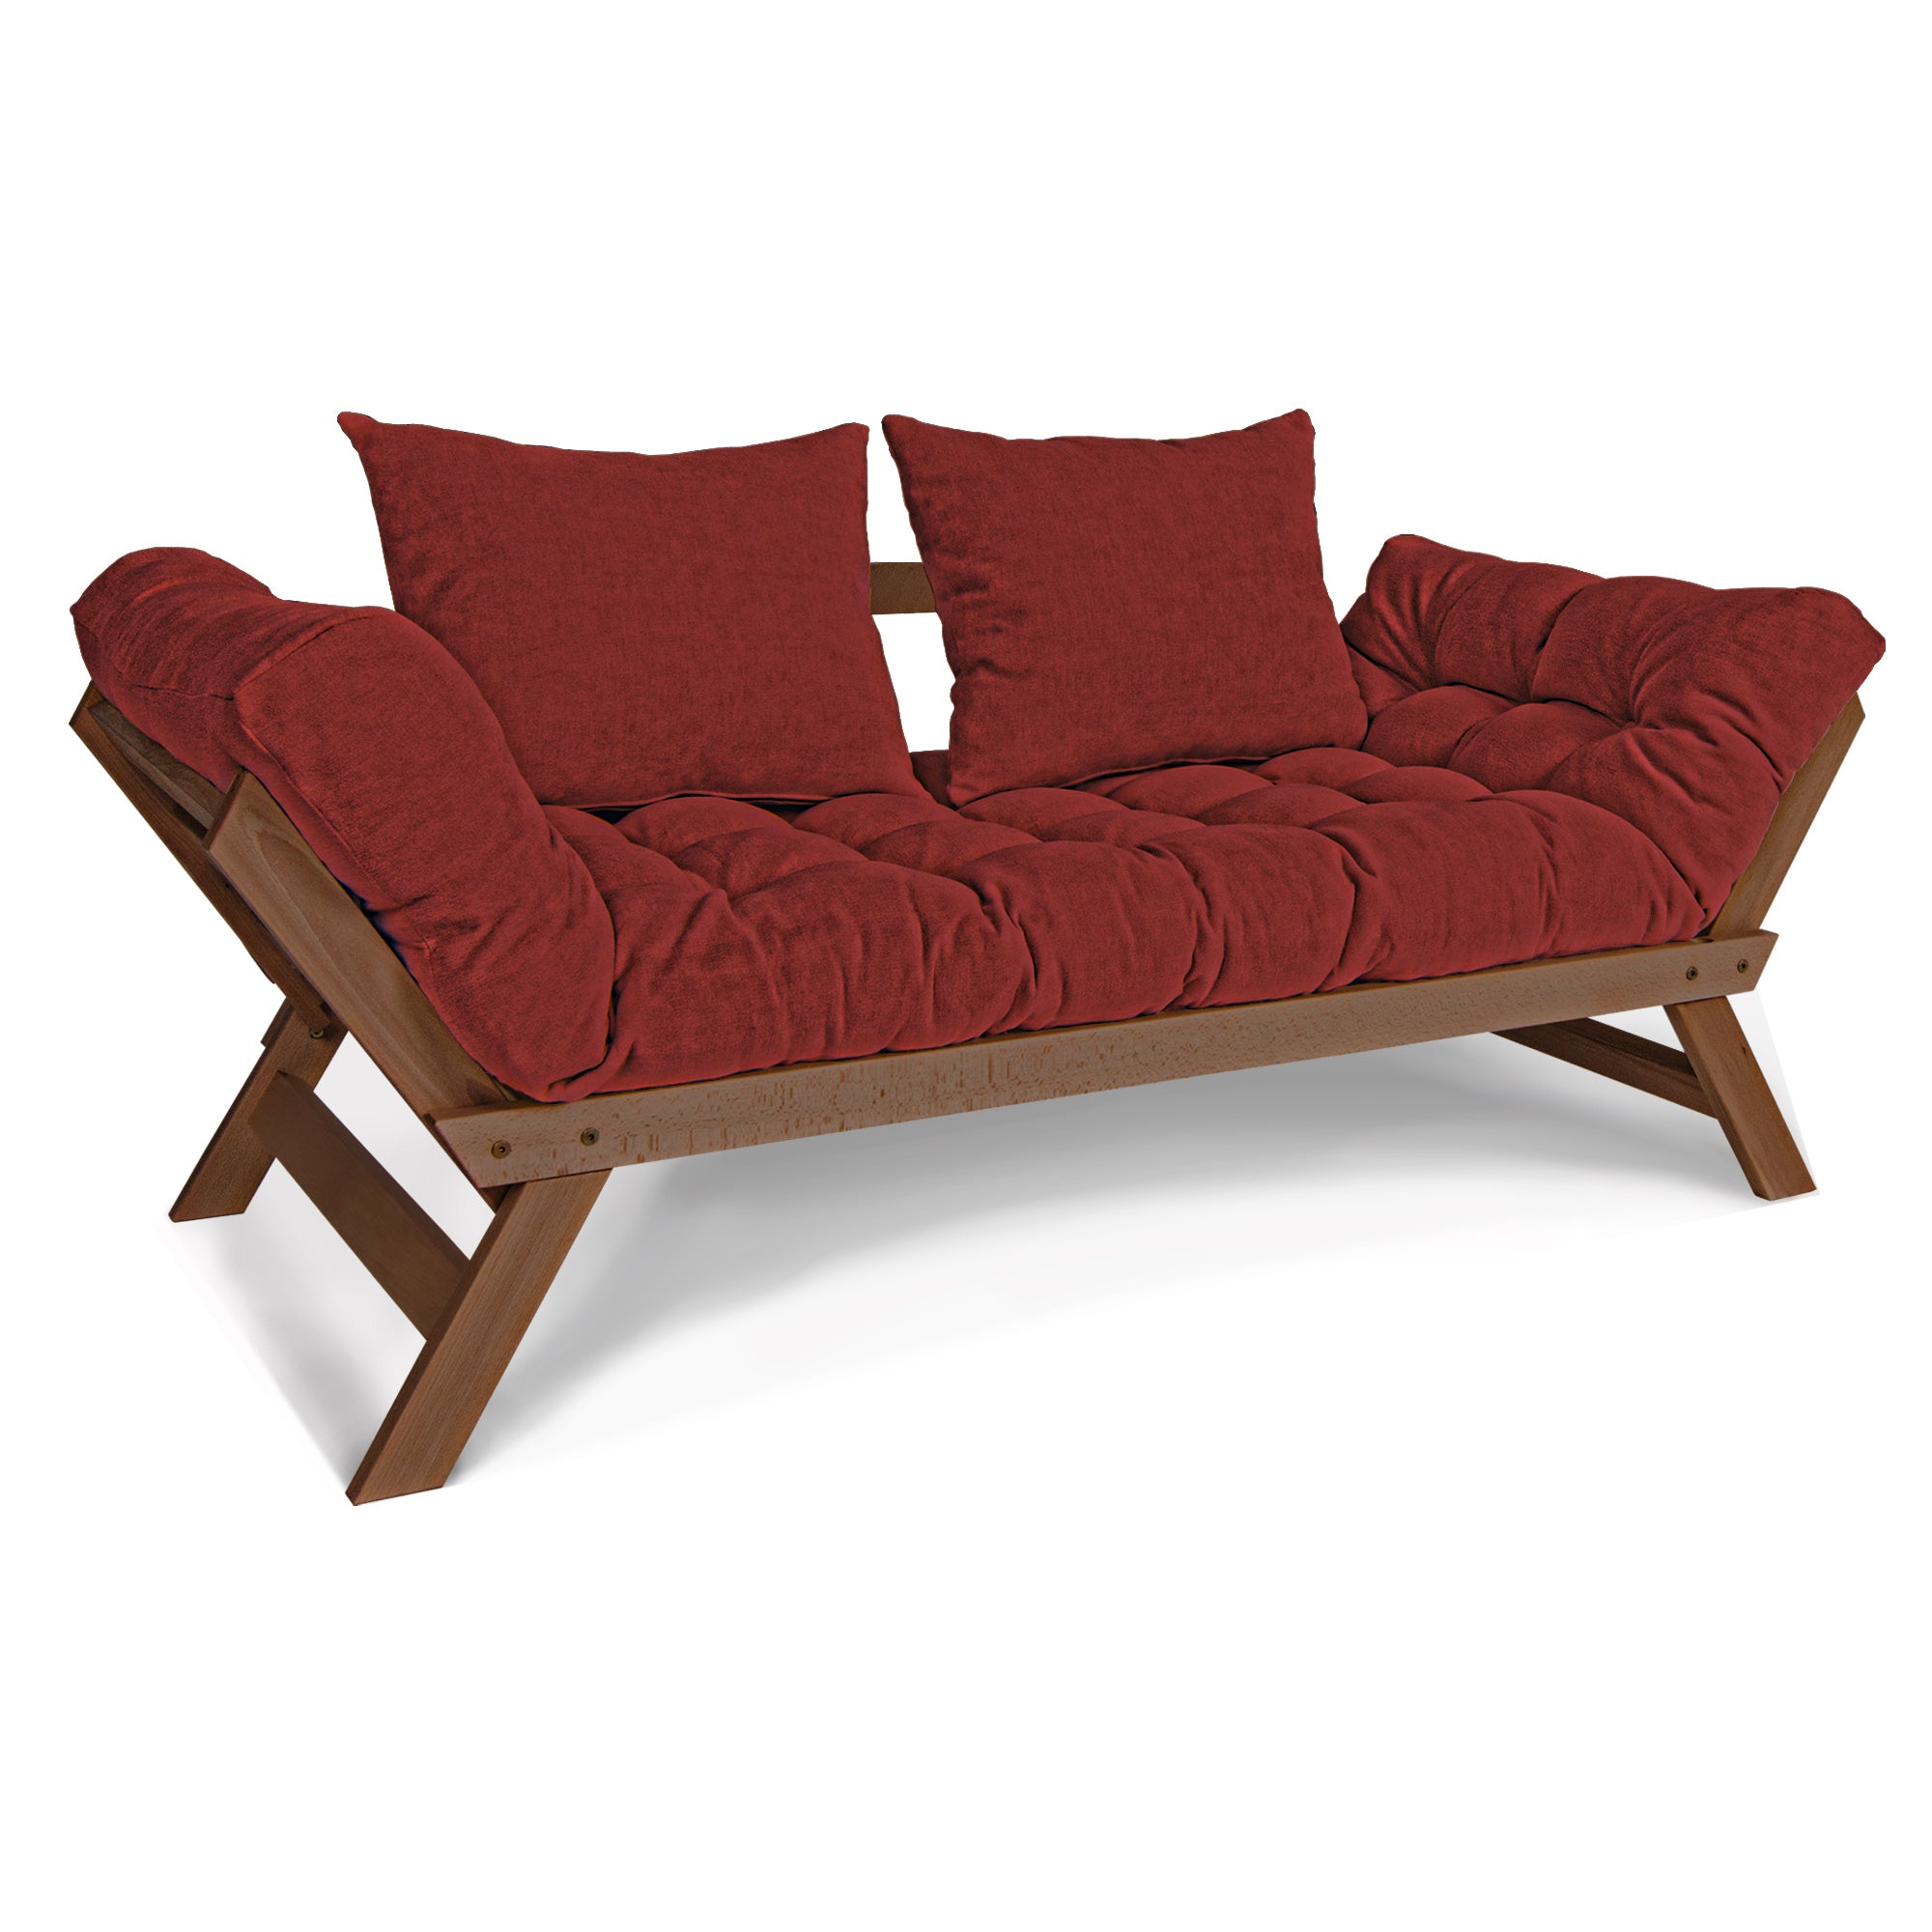 ALLEGRO Folding Sofa Bed, Beech Wood Frame, Walnut Colour upholstery red